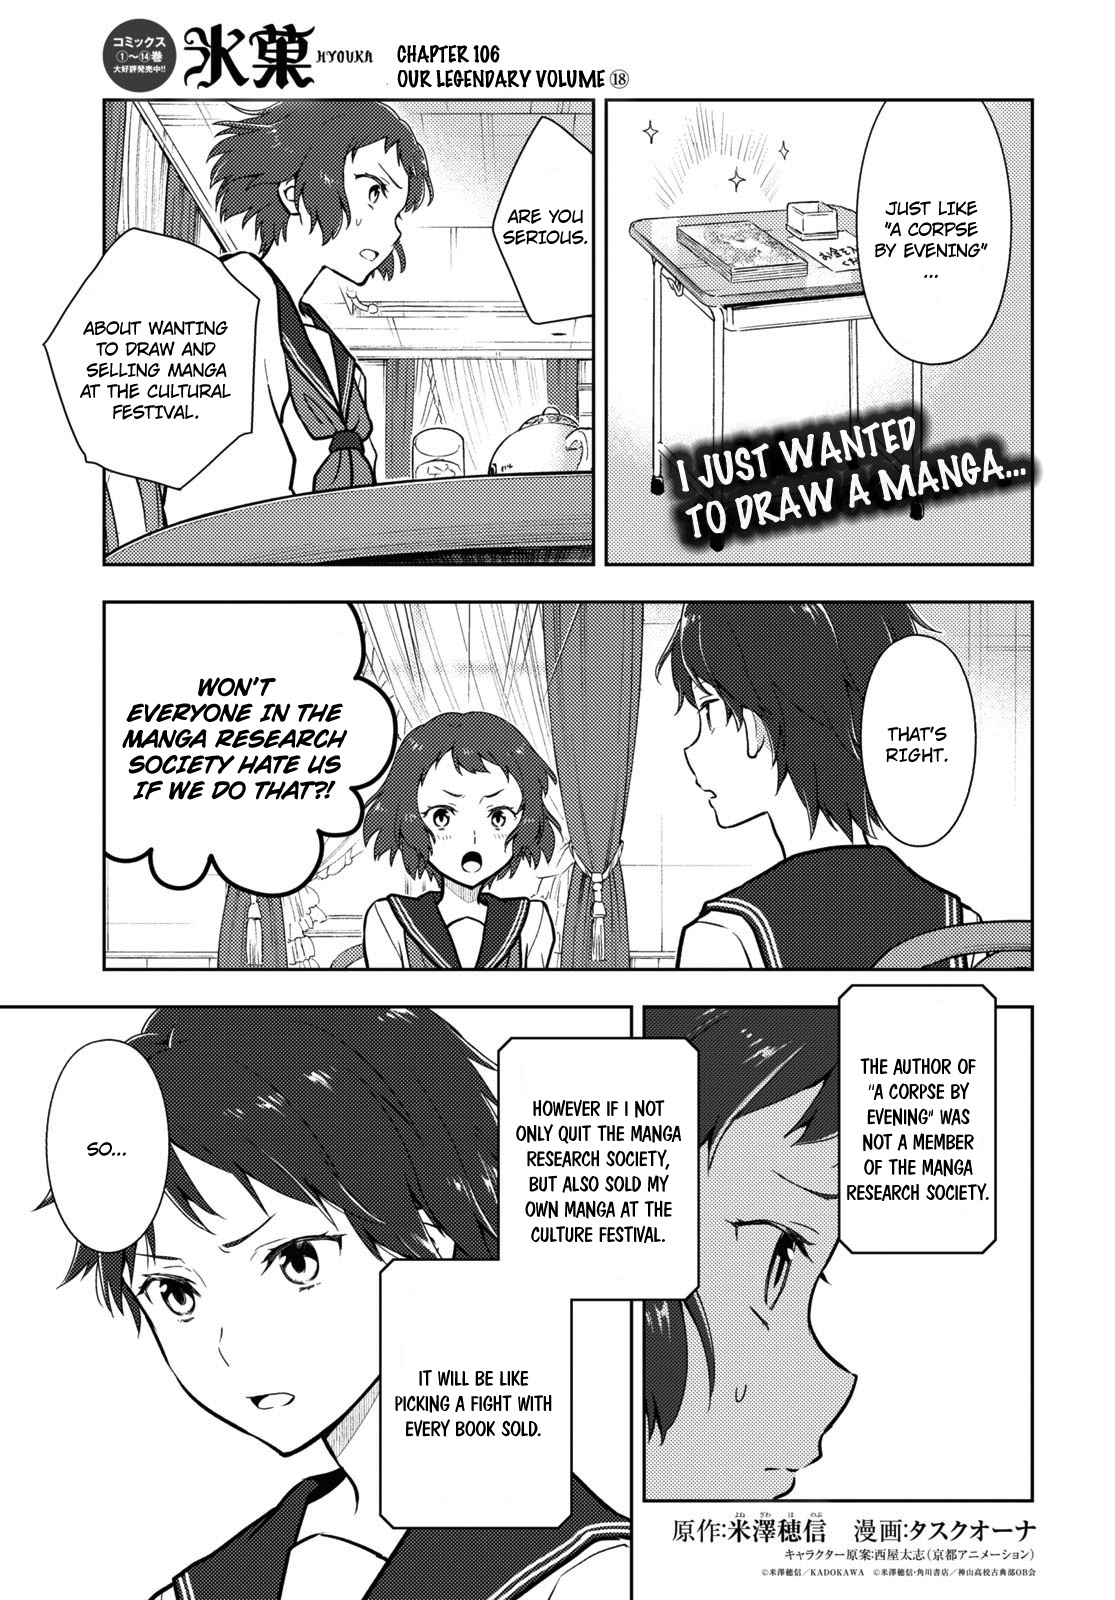 Hyouka Chapter 106: Our Legendary Volume ⑱ - Picture 1